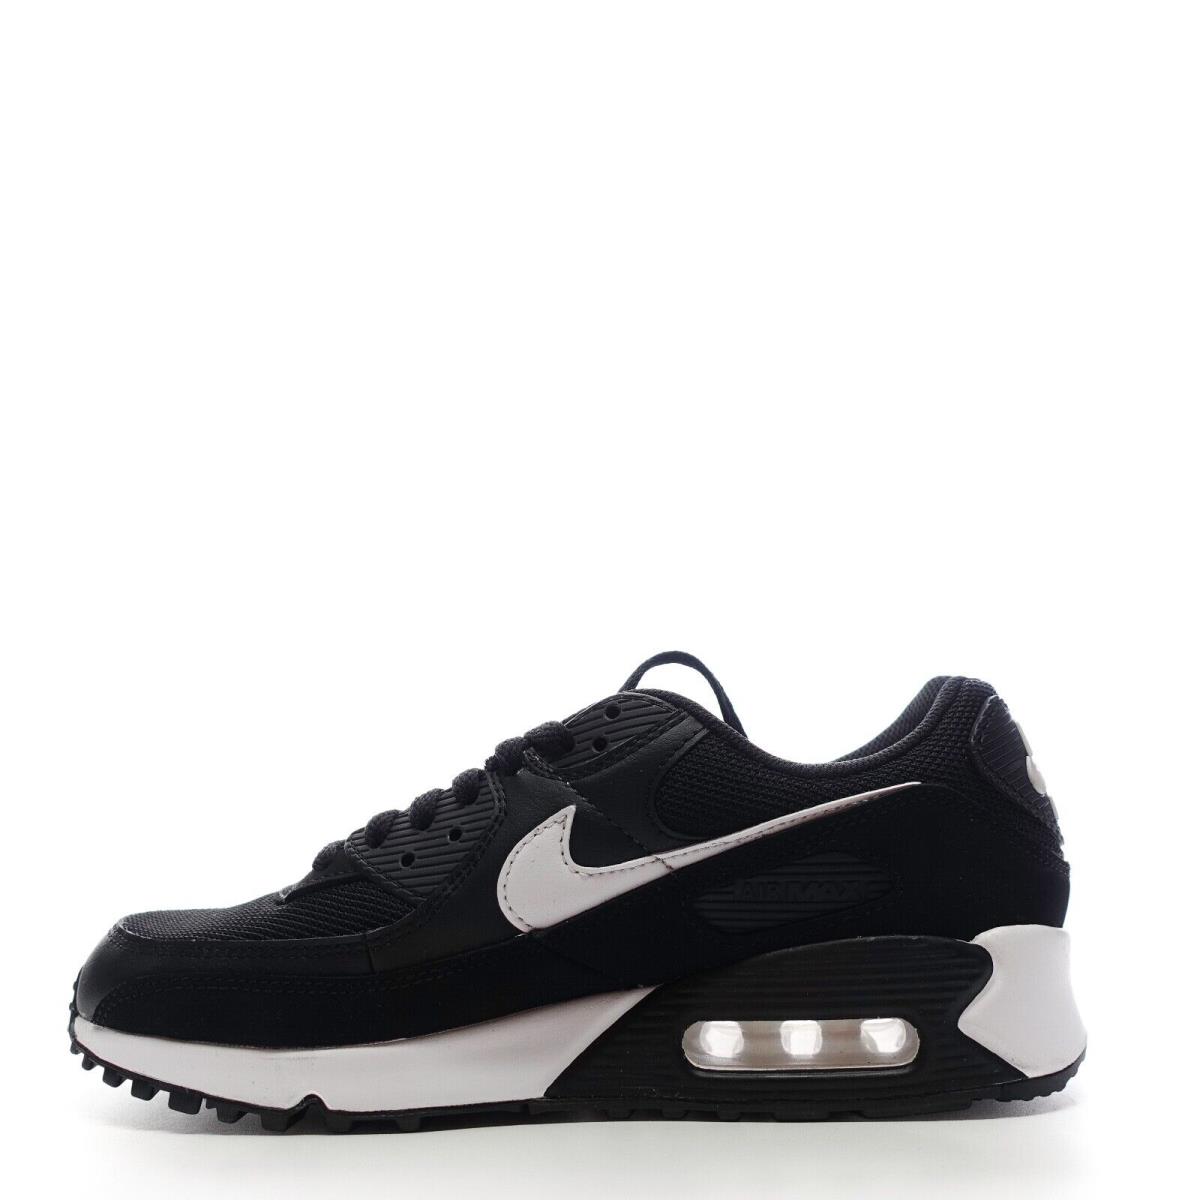 Nike Air Max 90 Black White Women s Size 9 Running Shoes Sneakers CQ2560-001